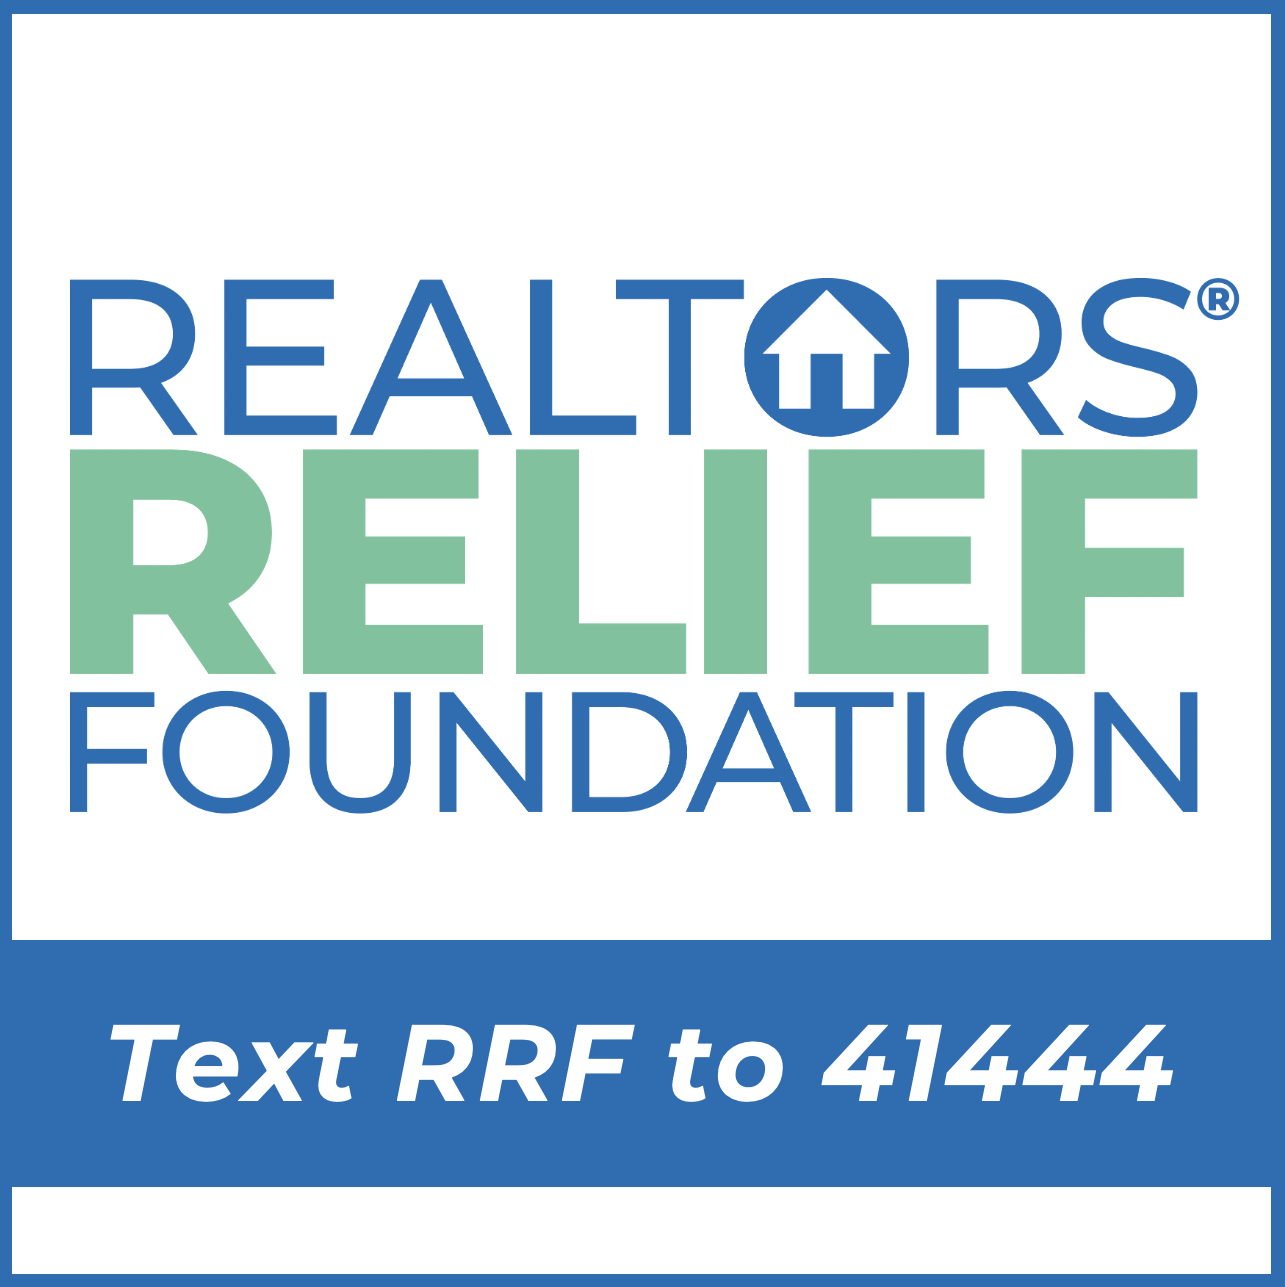 National Real Estate Ethics Day® benefits REALTORS® Relief Foundation logo text 41444 for donations